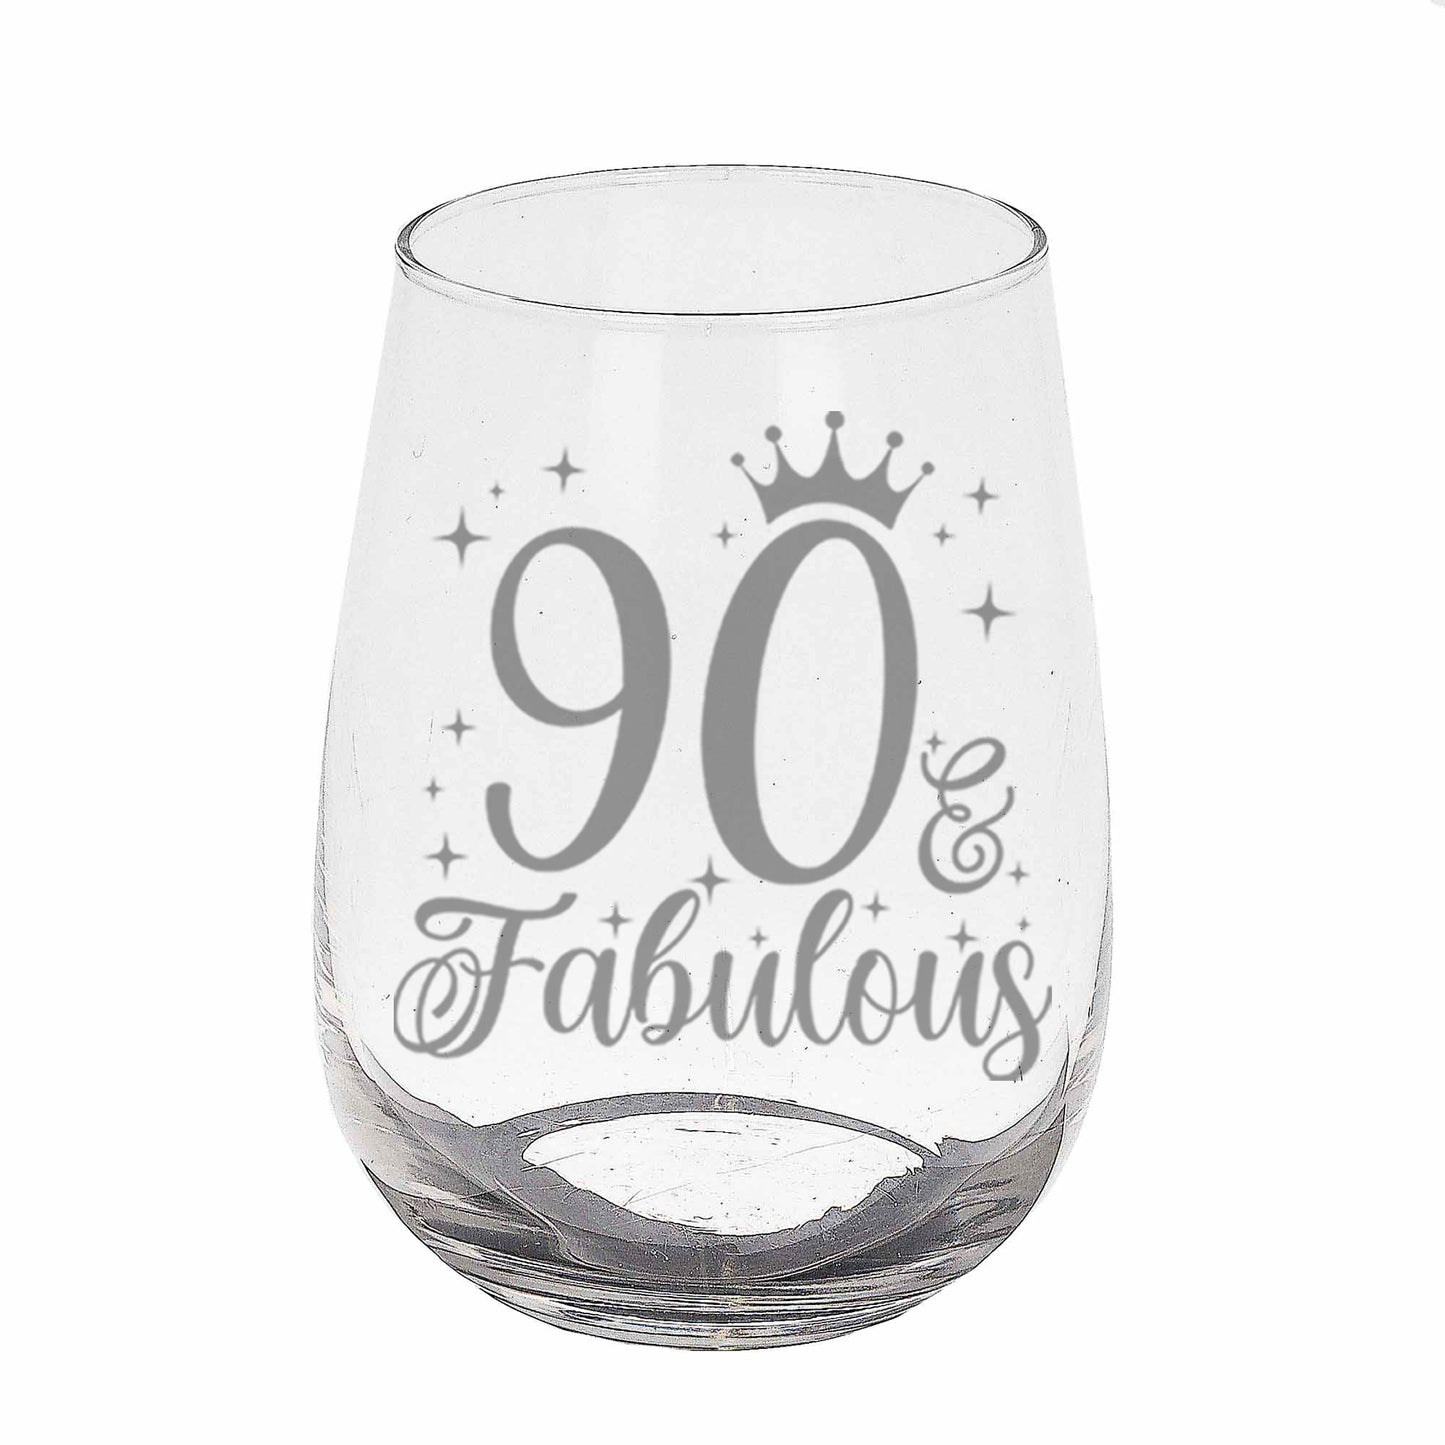 90 & Fabulous Engraved Stemless Gin Glass and/or Coaster Set  - Always Looking Good - Stemless Gin Glass On Its Own  